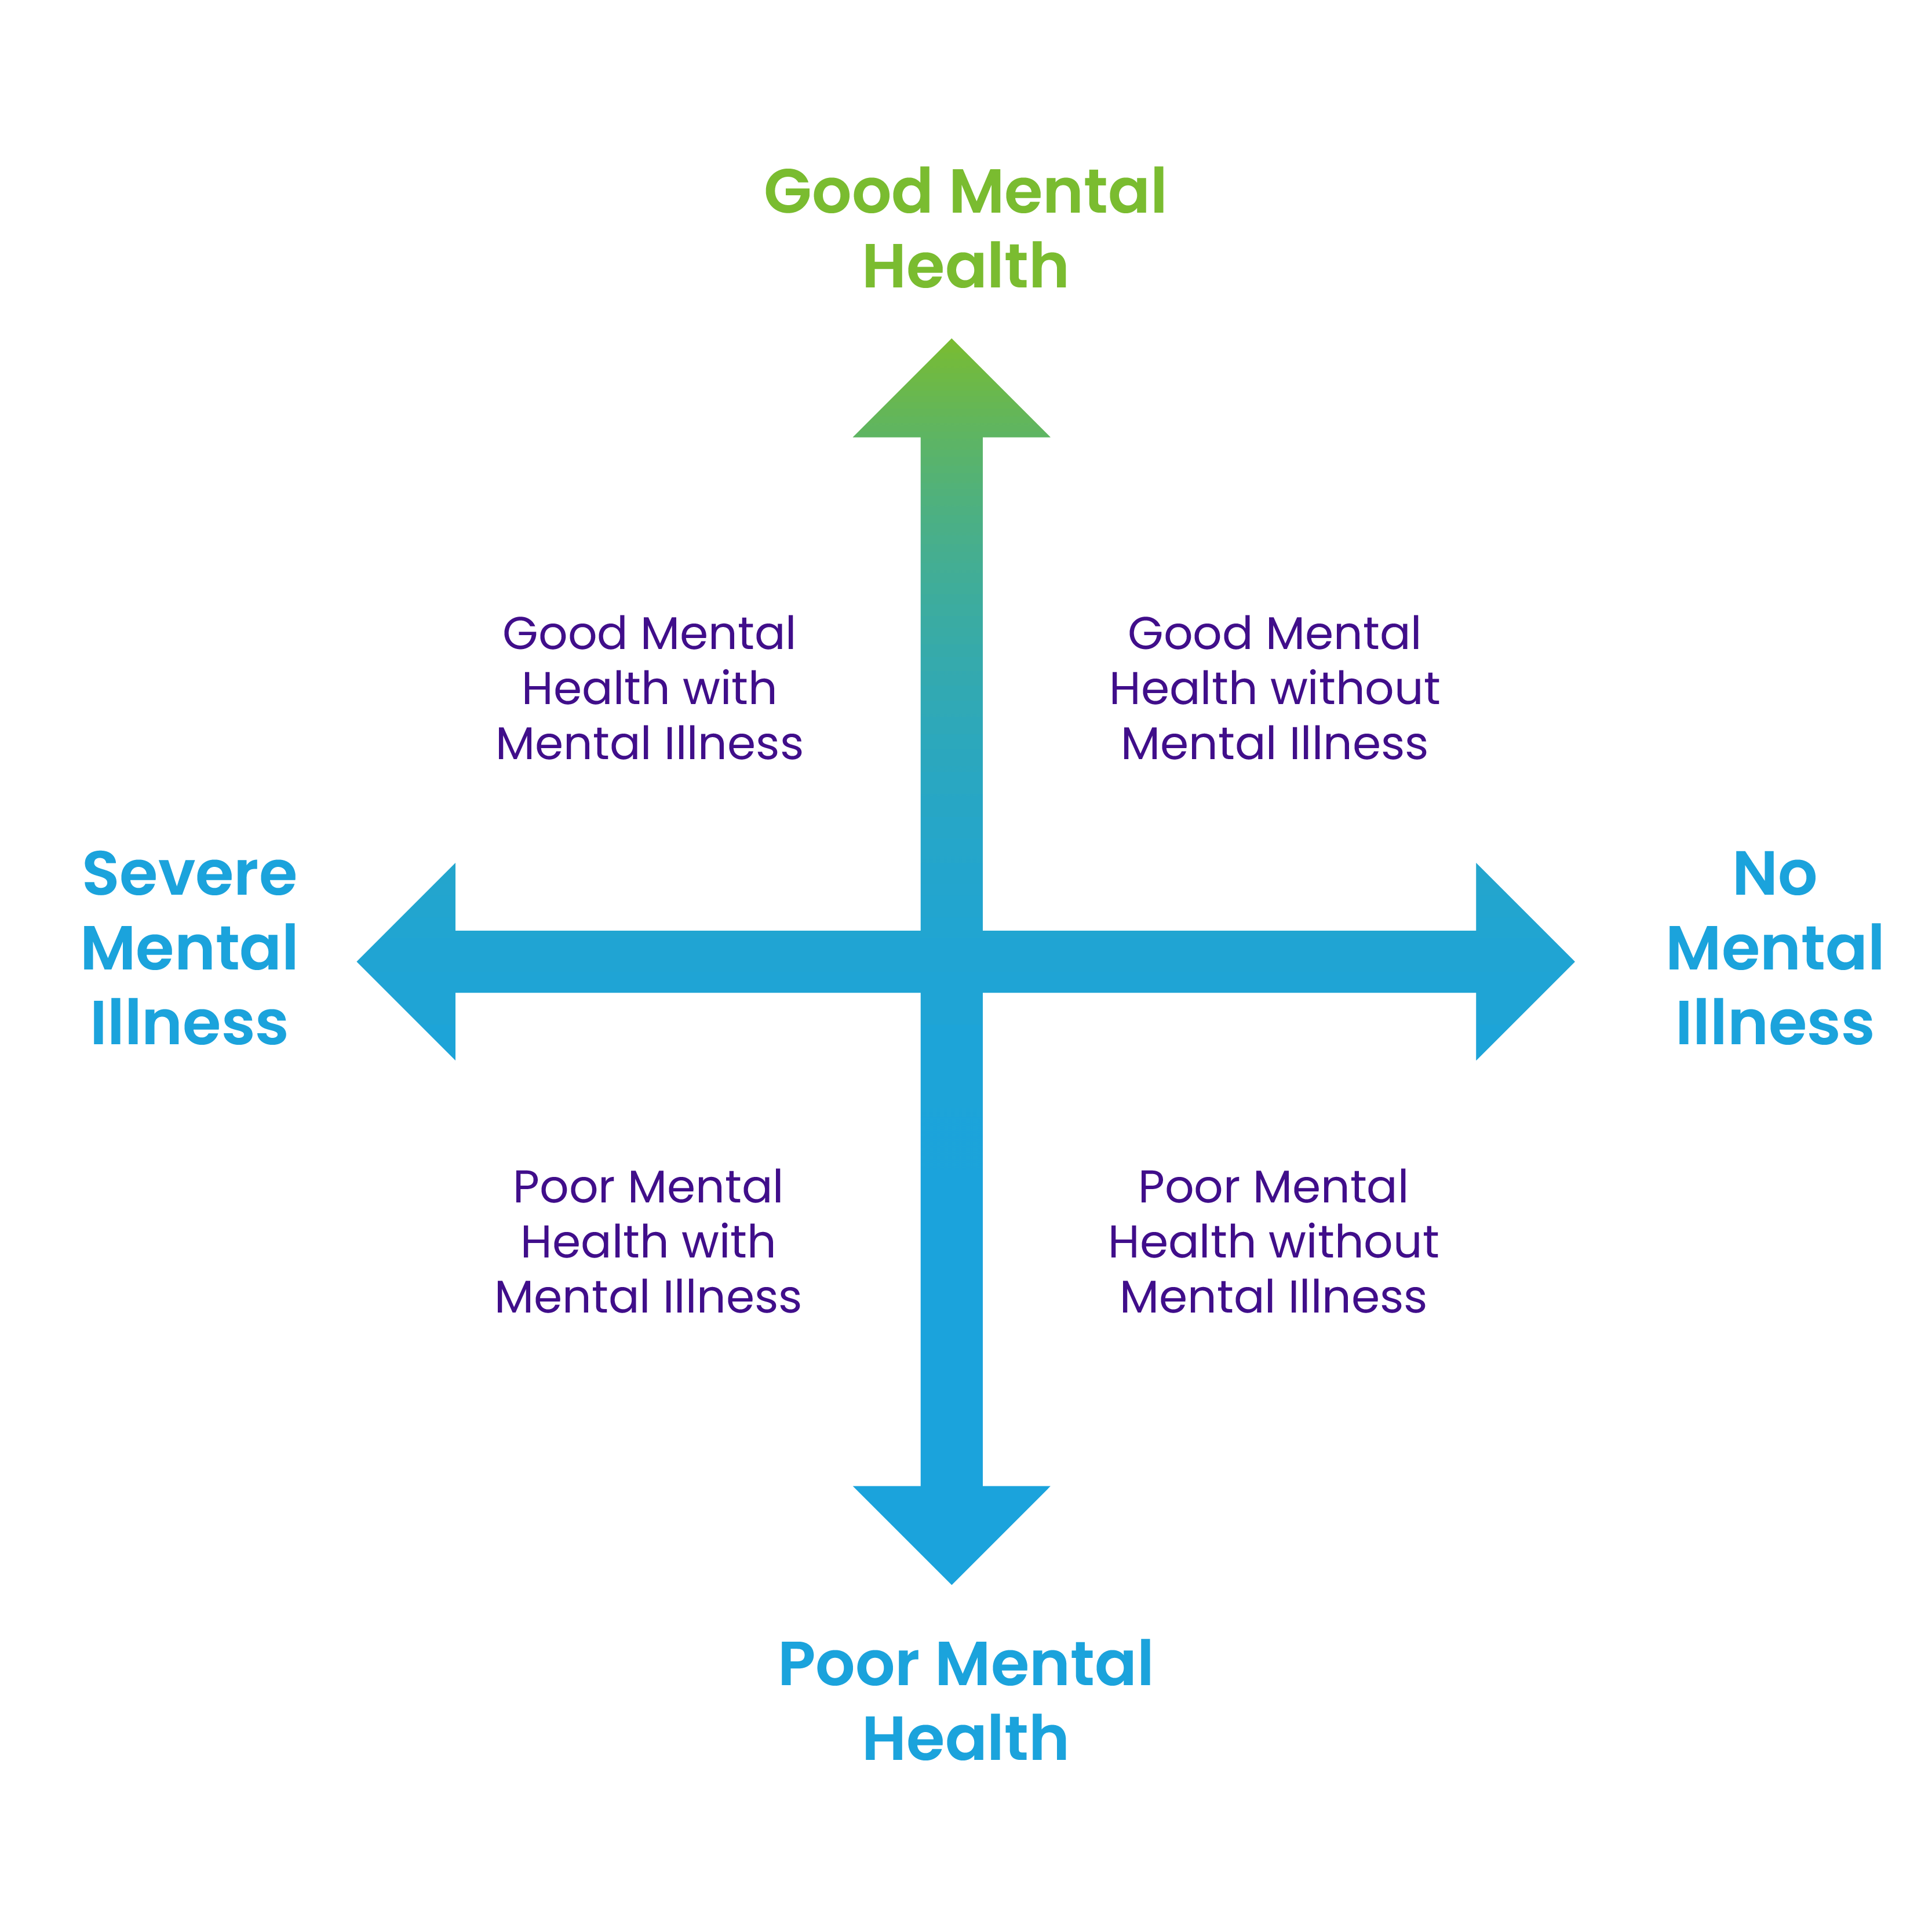 A continuum with a vertical axis and a horizontal axis that cross in the middle. The vertical axis shows good mental health and poor mental health. The horizontal access shows severe mental illness and no mental illness.